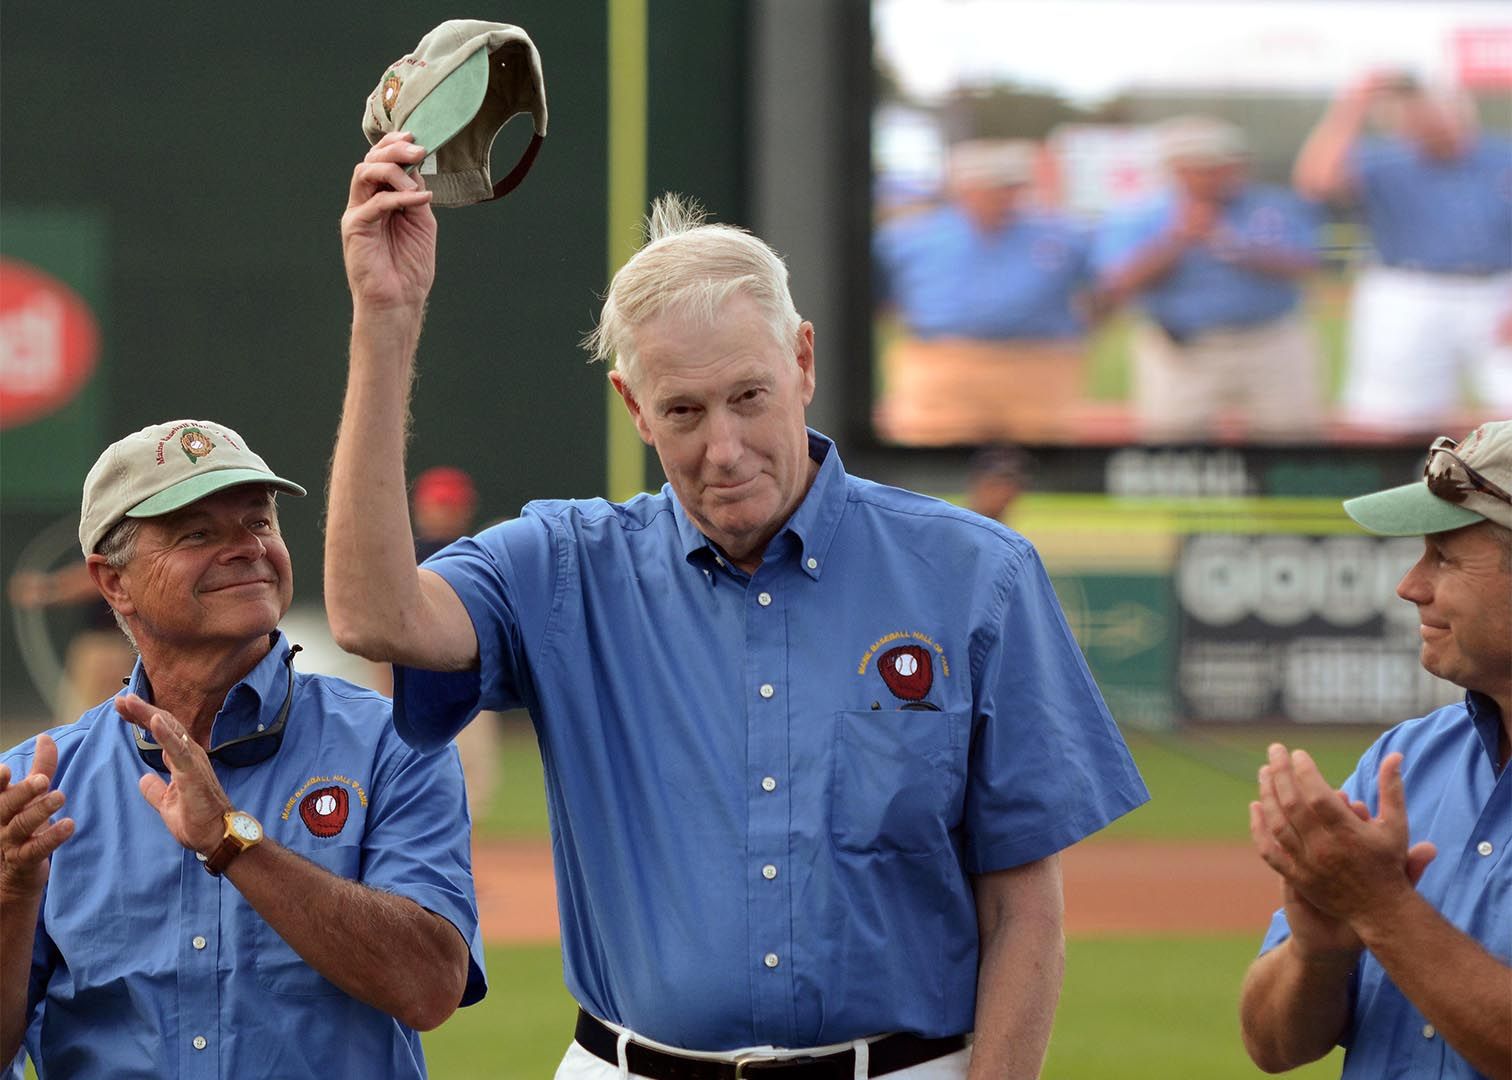 Thom Freeman '63 tips his hat as he and fellow Maine Baseball Hall of Fame inductees are honored at Hadlock Field in Portland during a minor league game between the Sea Dogs and 